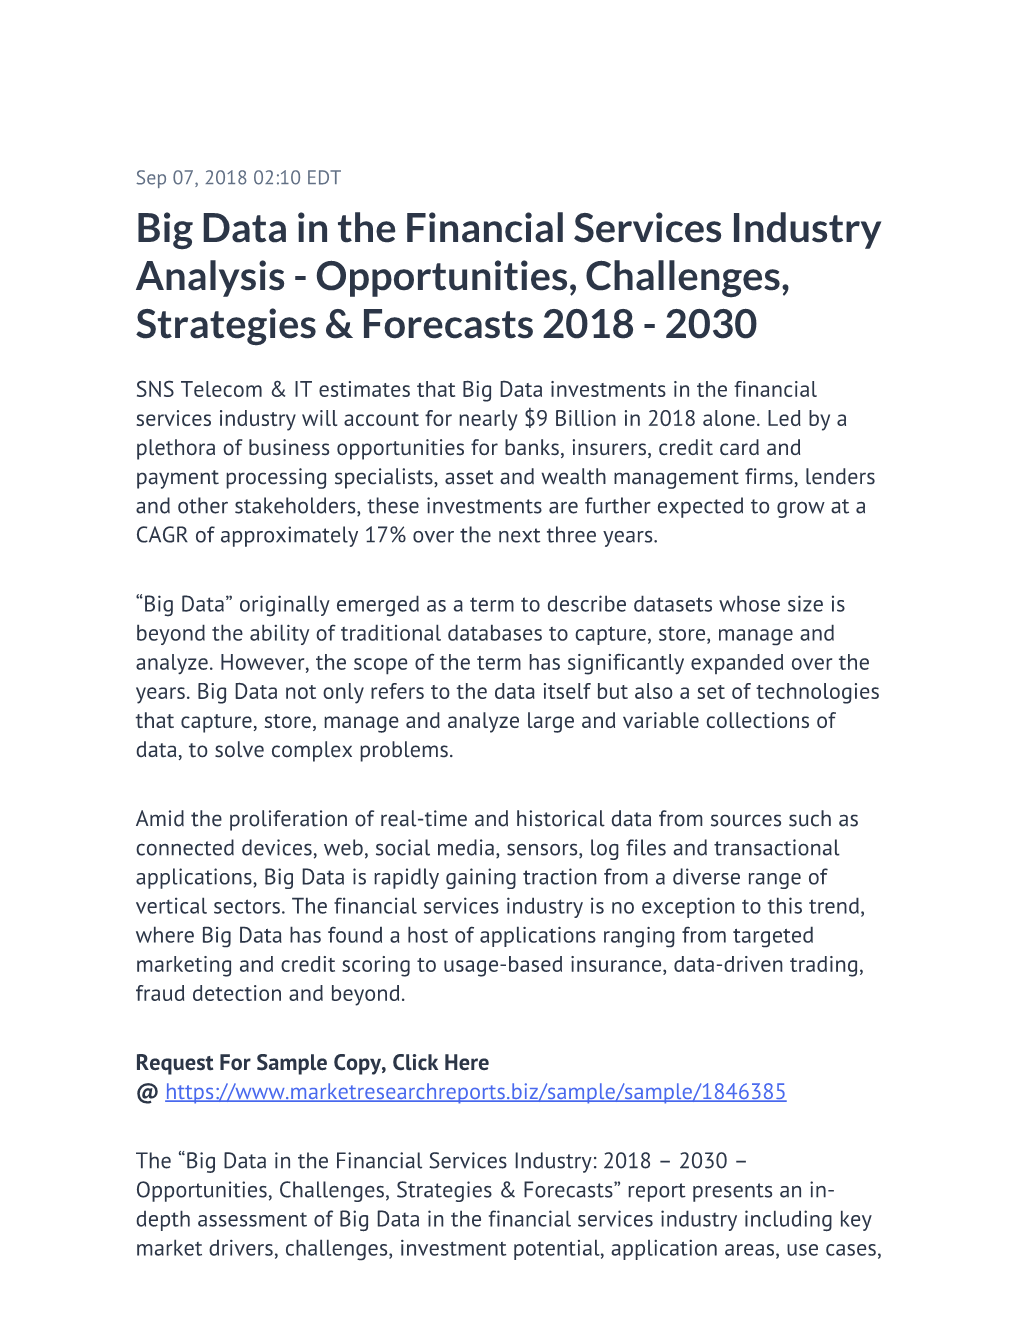 Big Data in the Financial Services Industry Analysis - Opportunities, Challenges, Strategies & Forecasts 2018 - 2030